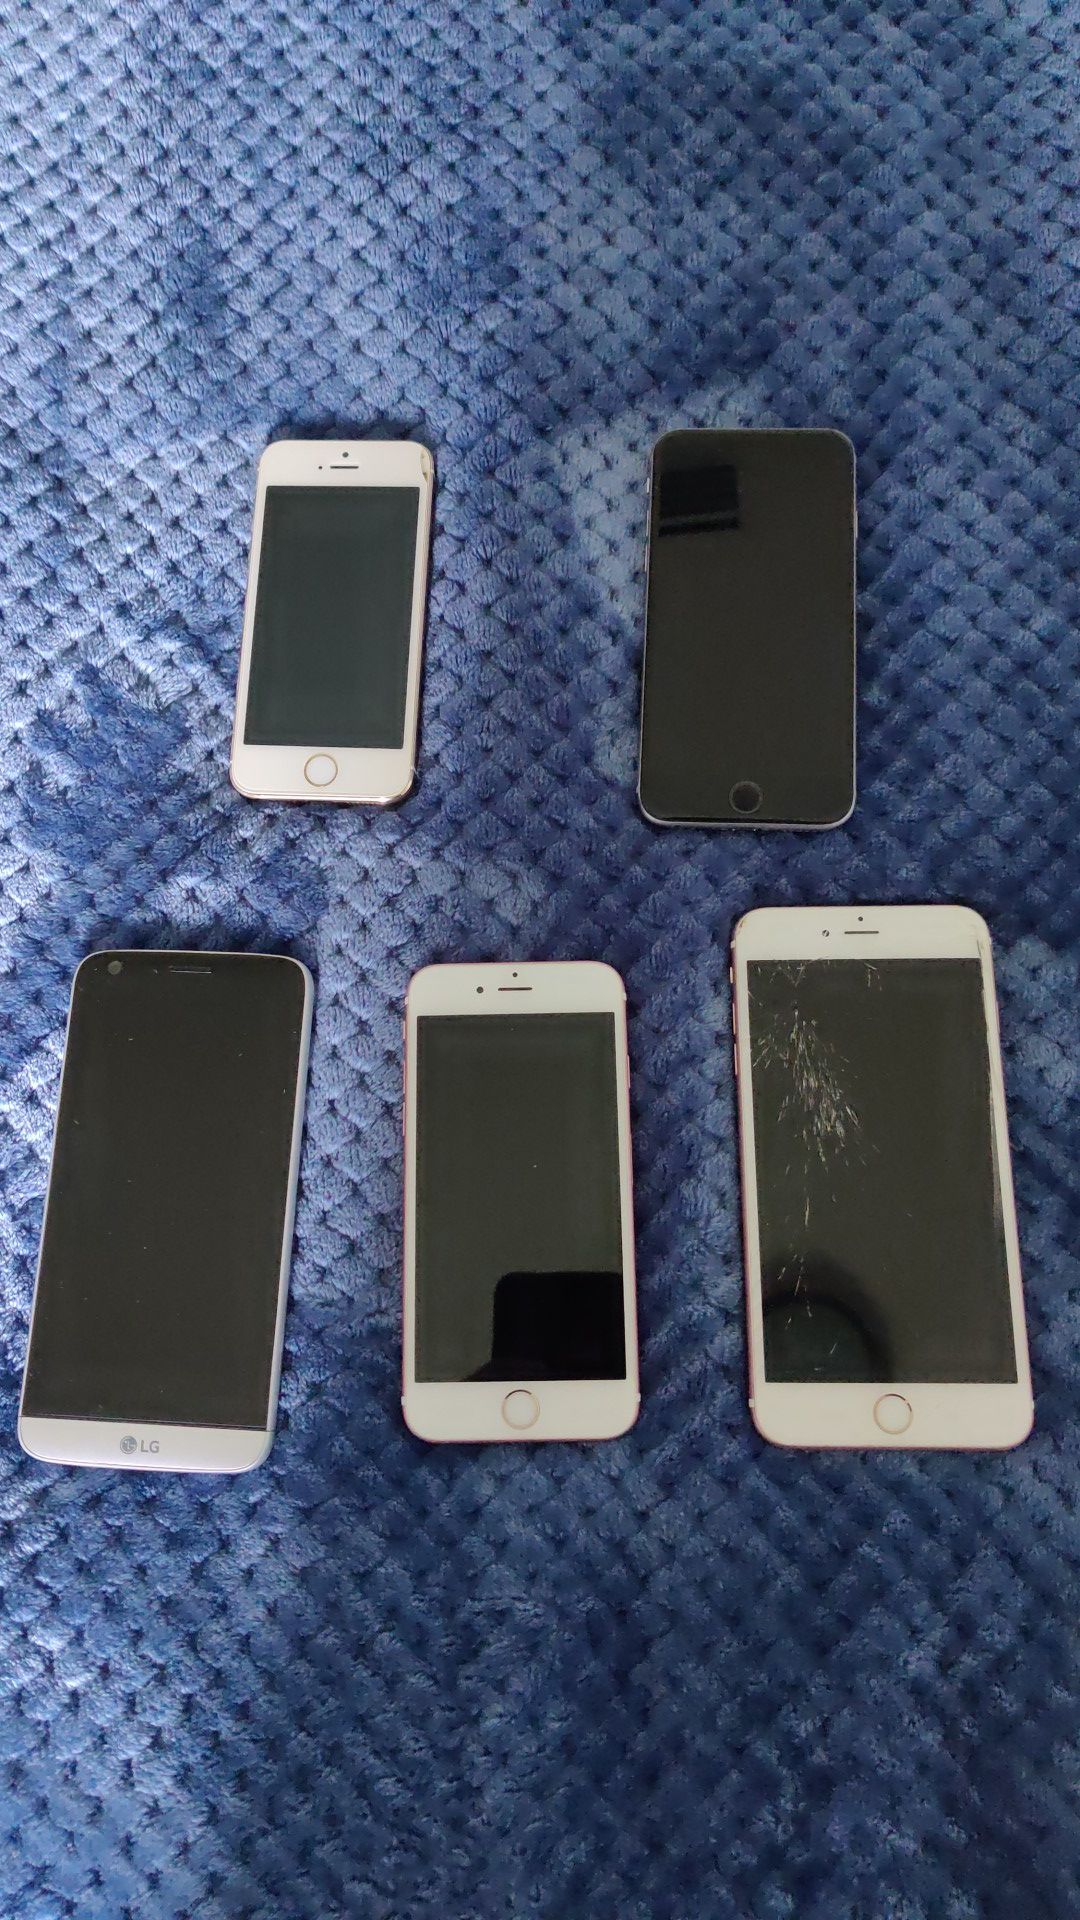 Phones for sale $50-$75